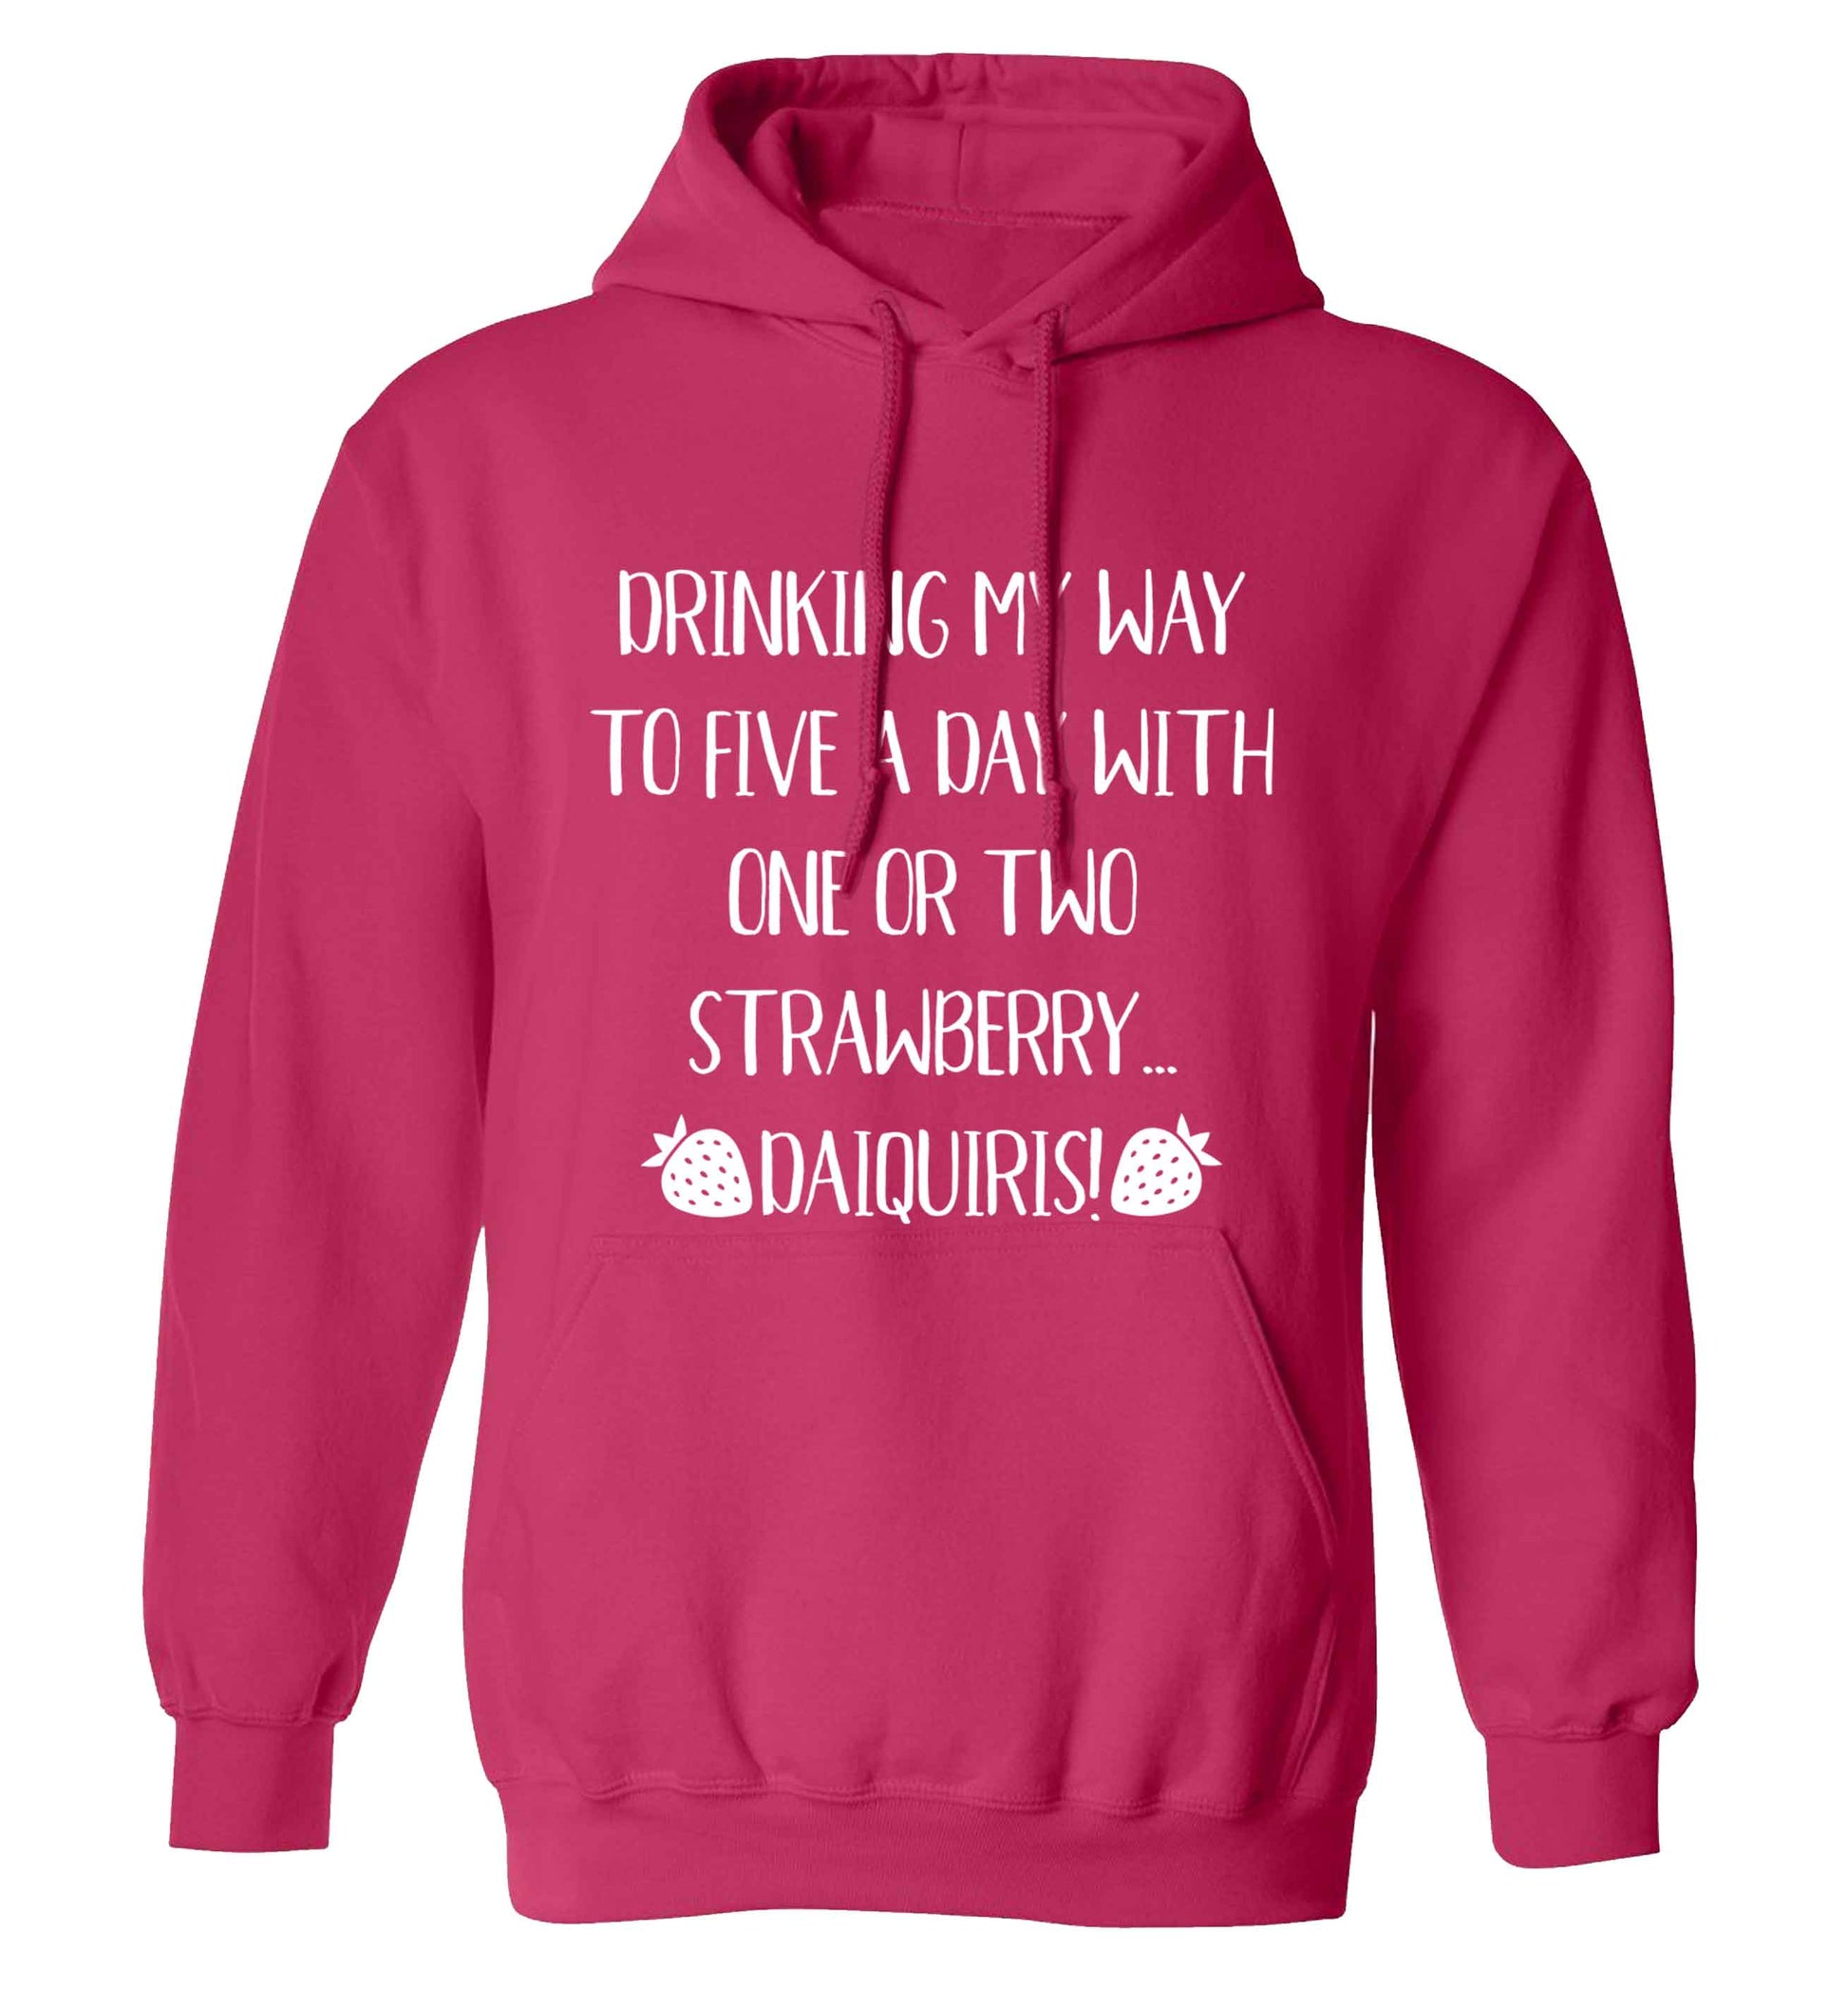 Drinking my way to five a day with one or two straberry daiquiris adults unisex pink hoodie 2XL